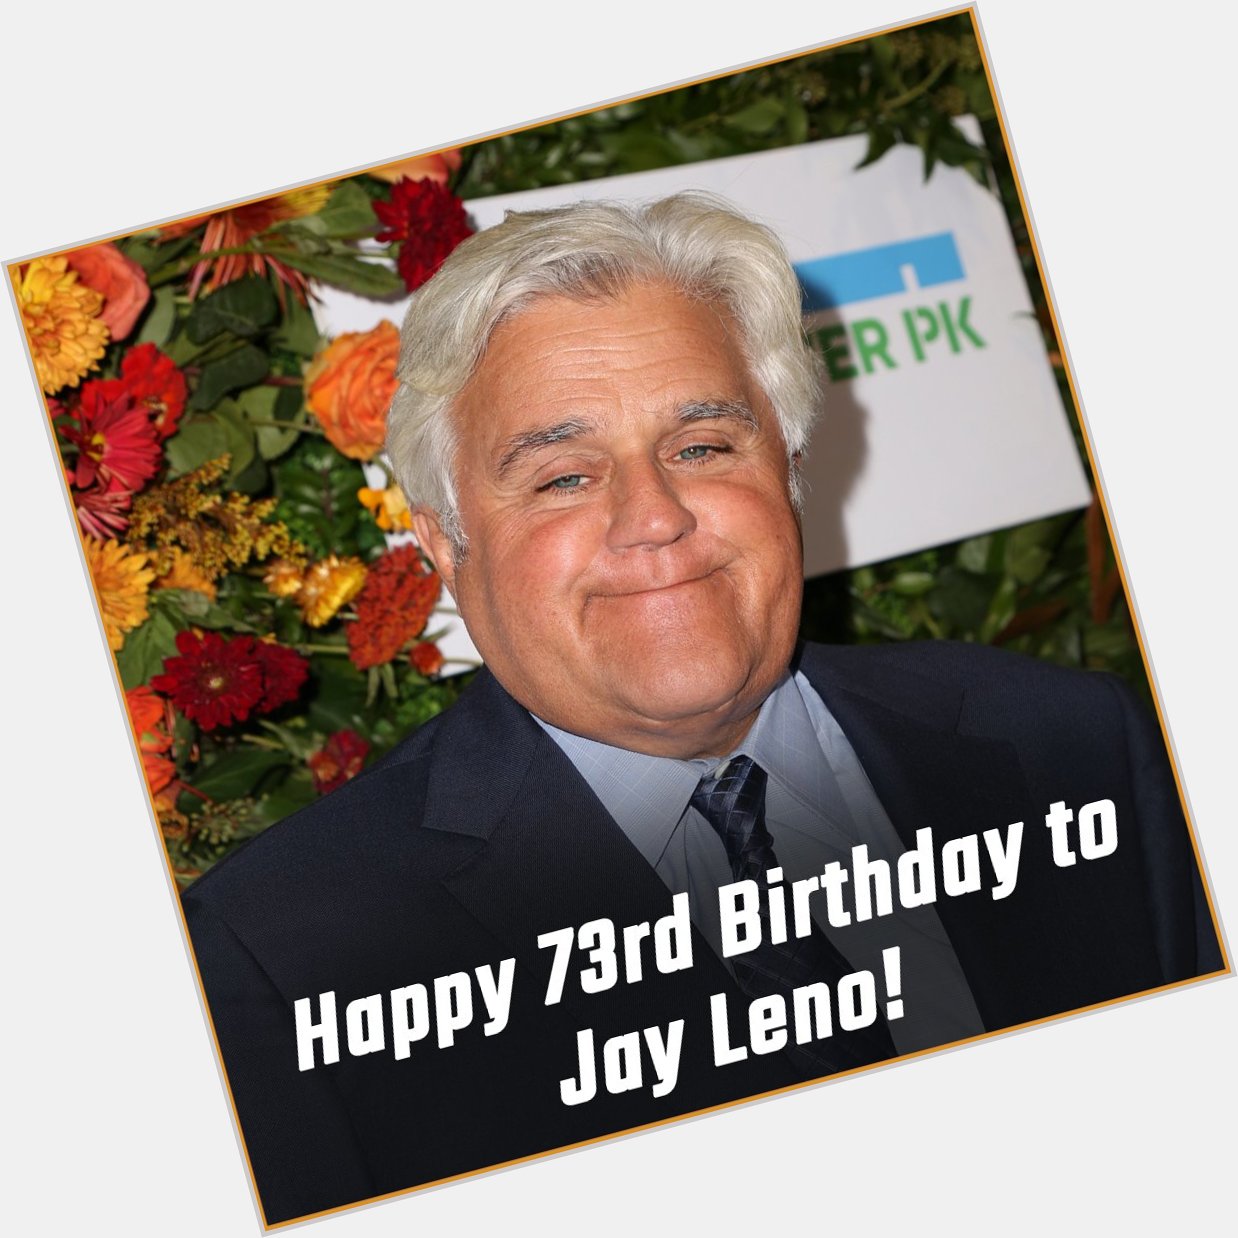 Happy 73rd birthday to one of most incredible hosts, Jay Leno! 